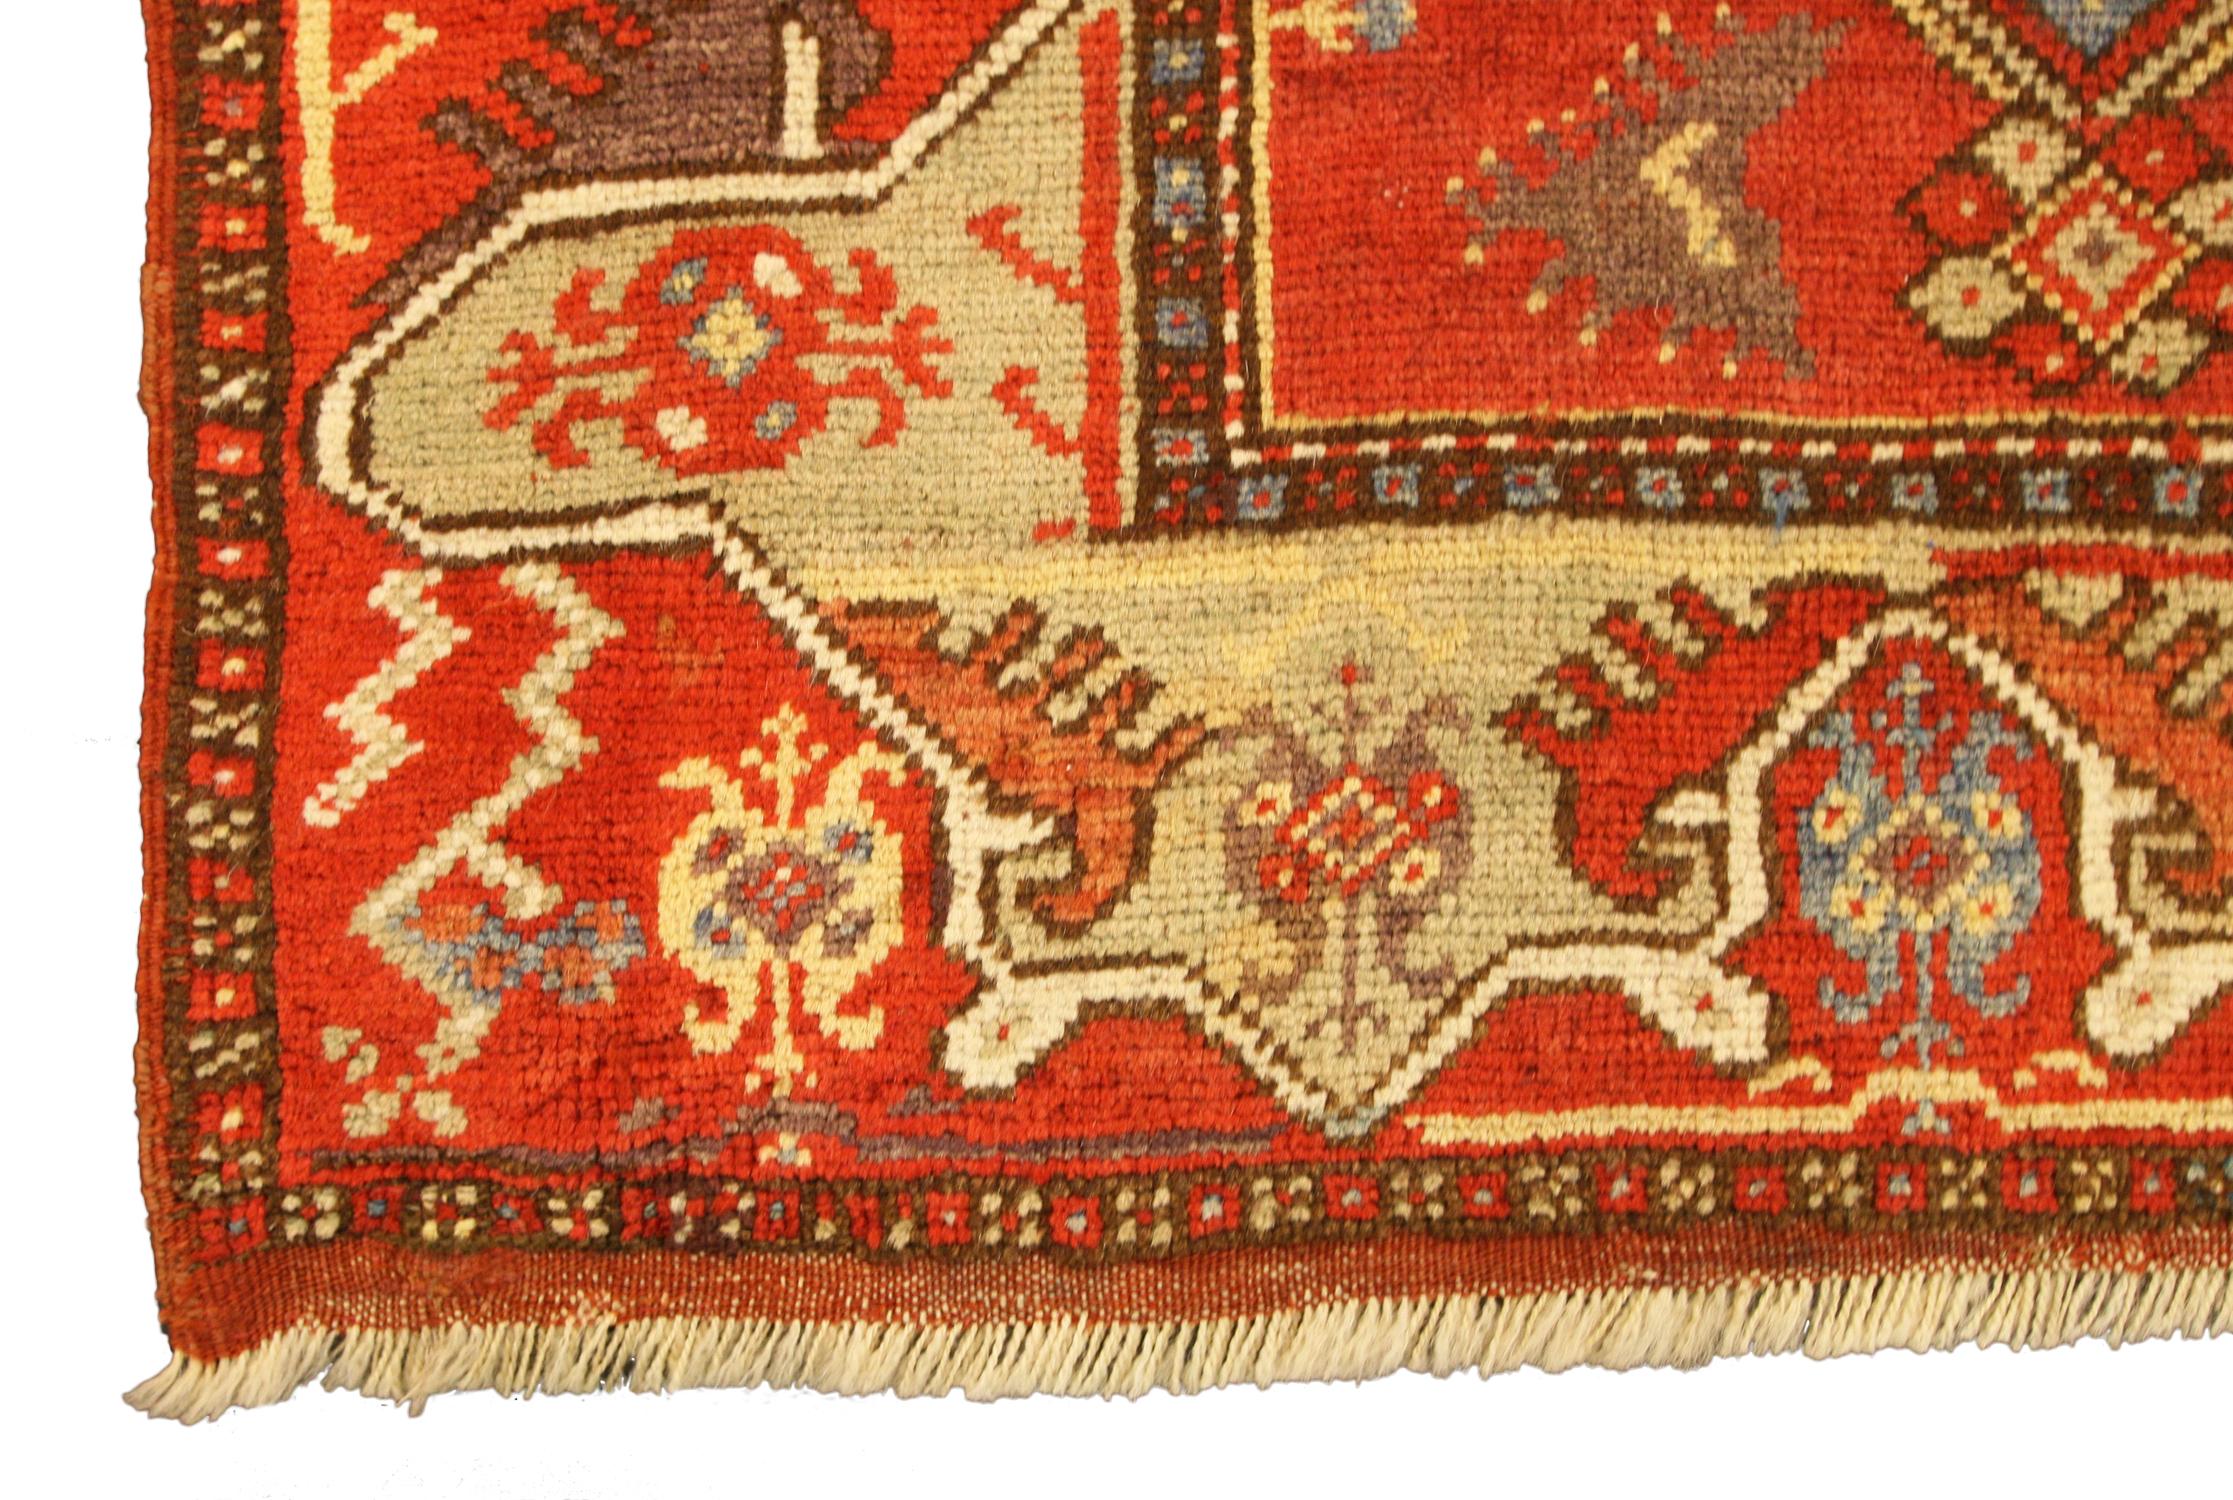 This is an antique Melas rug woven in Turkey during the end of the 19th century and measures 118 x 80CM in size. Its field is comprised of two large-scale medallions set on a red background color. The border is made up of a geometric abstract design